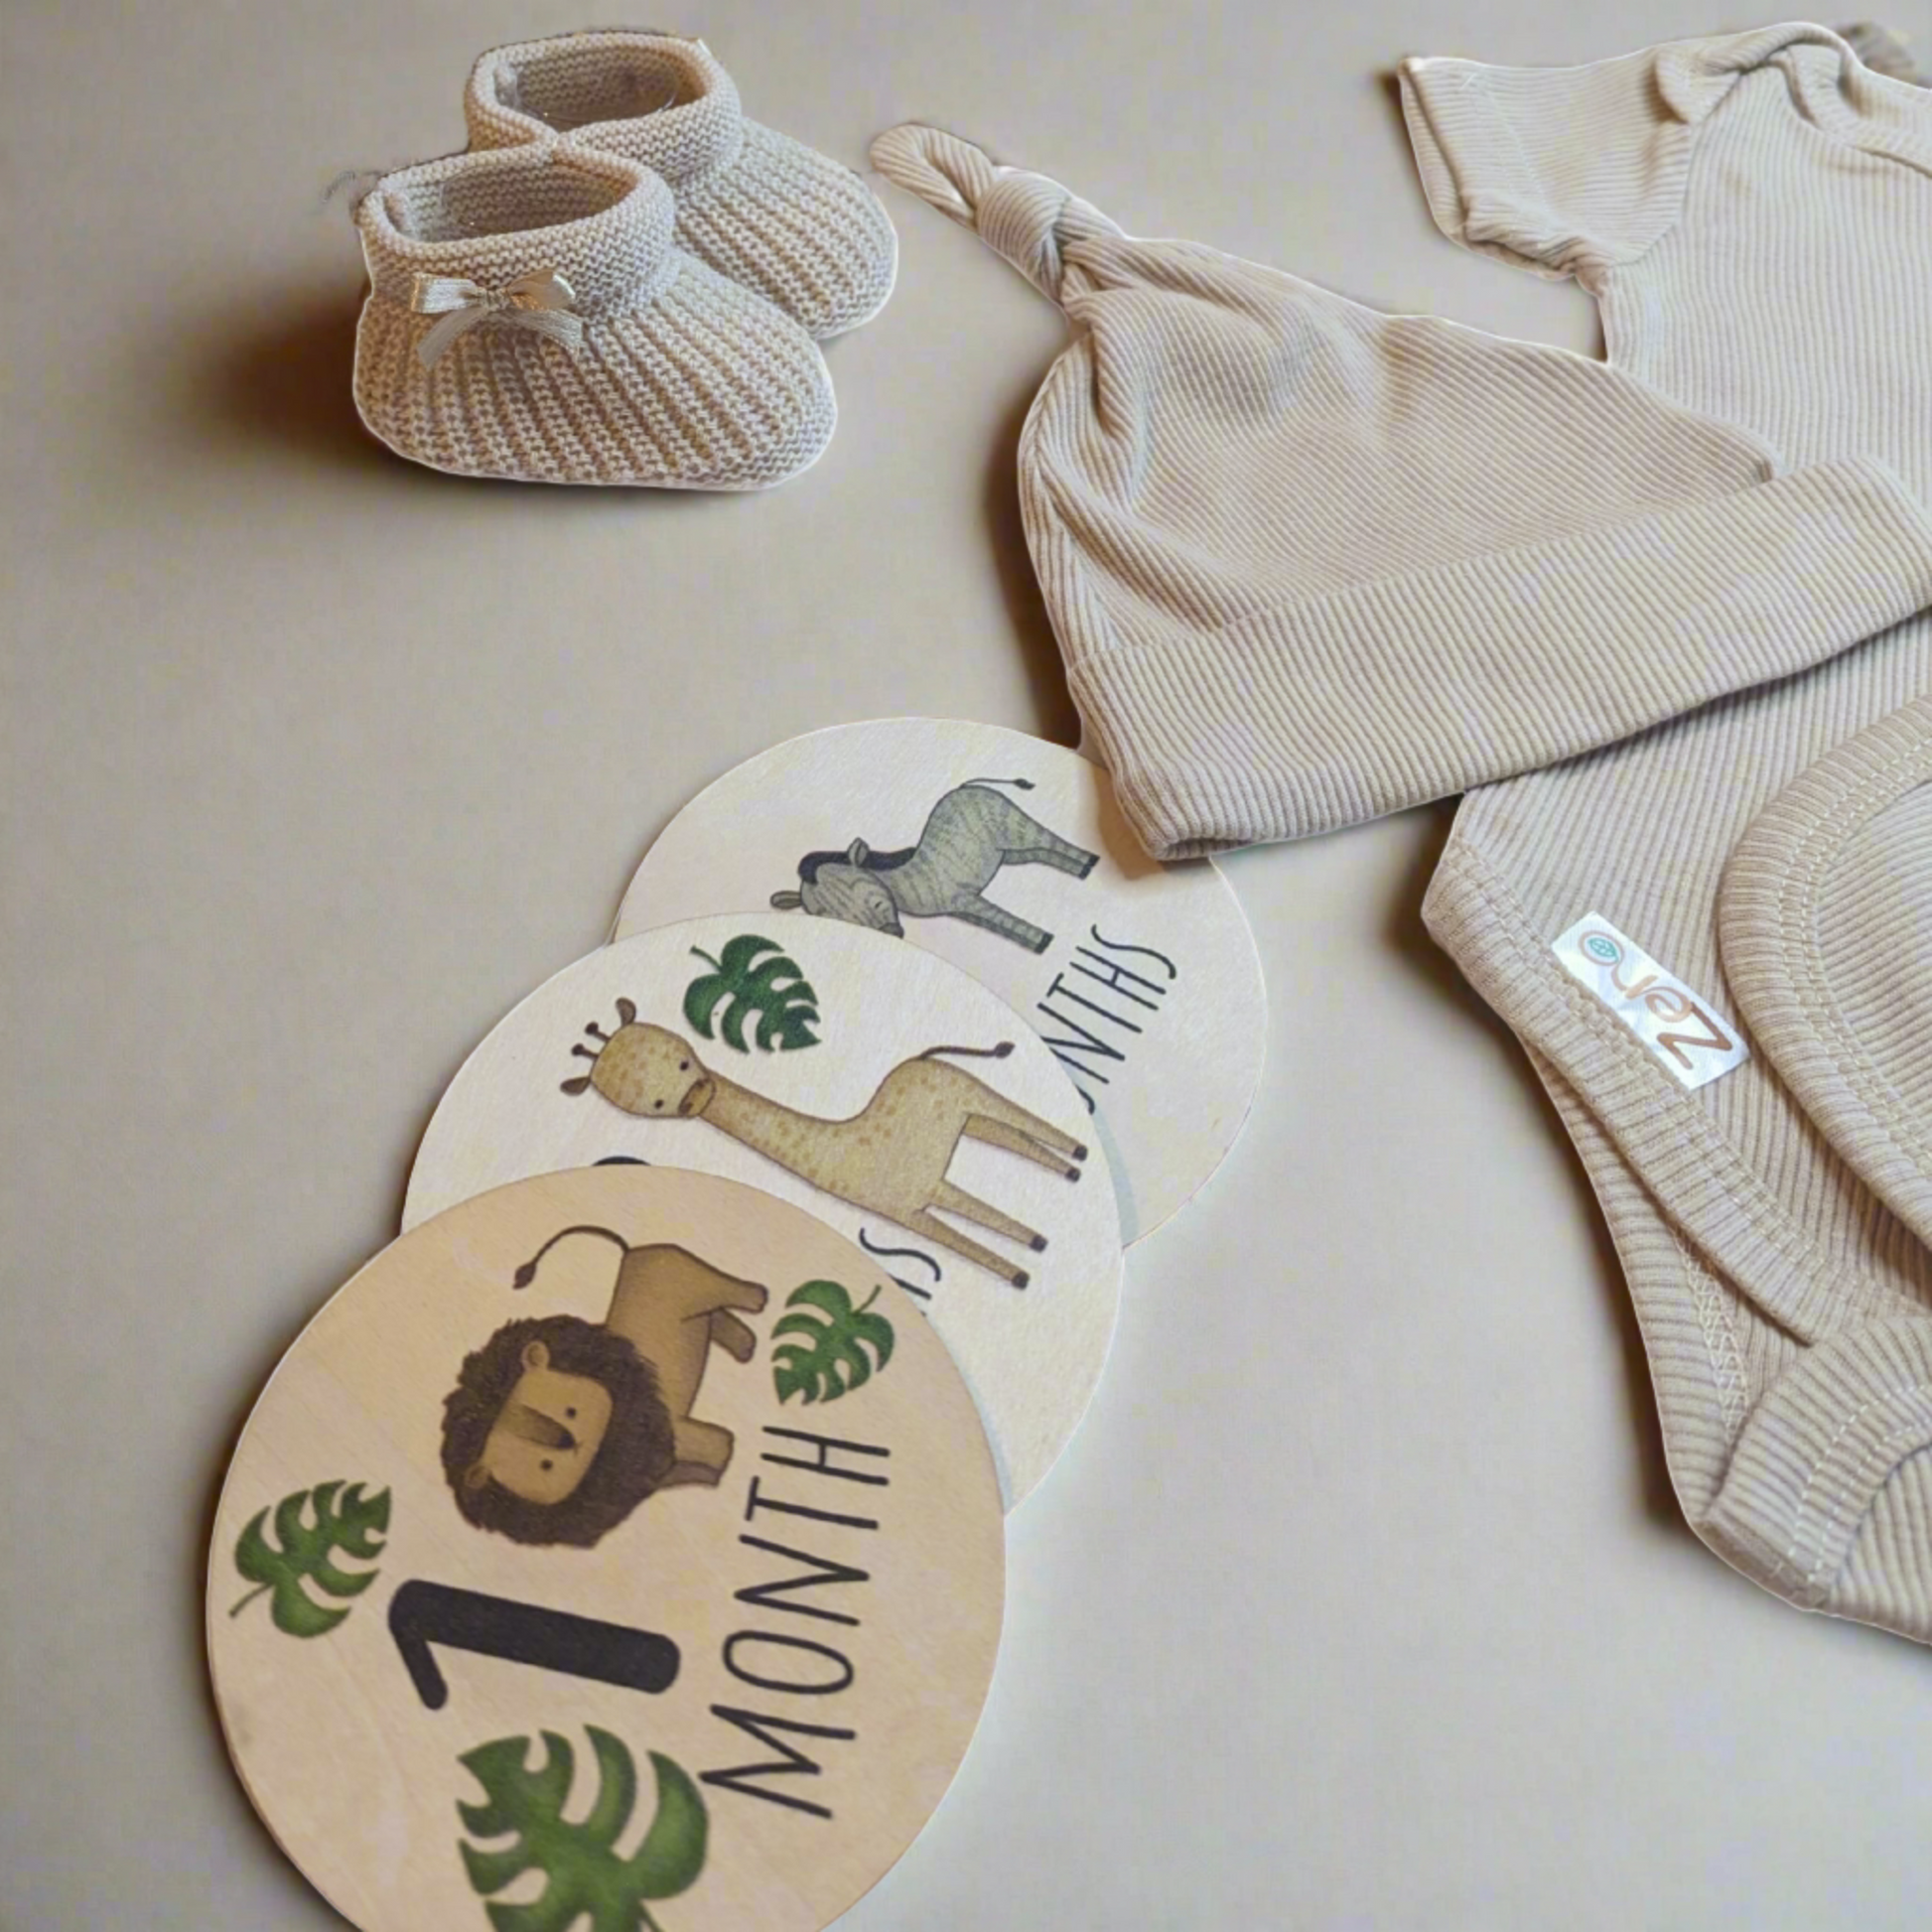 Complete mummy to be gift hamper with hessian bag, milestone discs, eco-friendly baby clothes, and baby booties